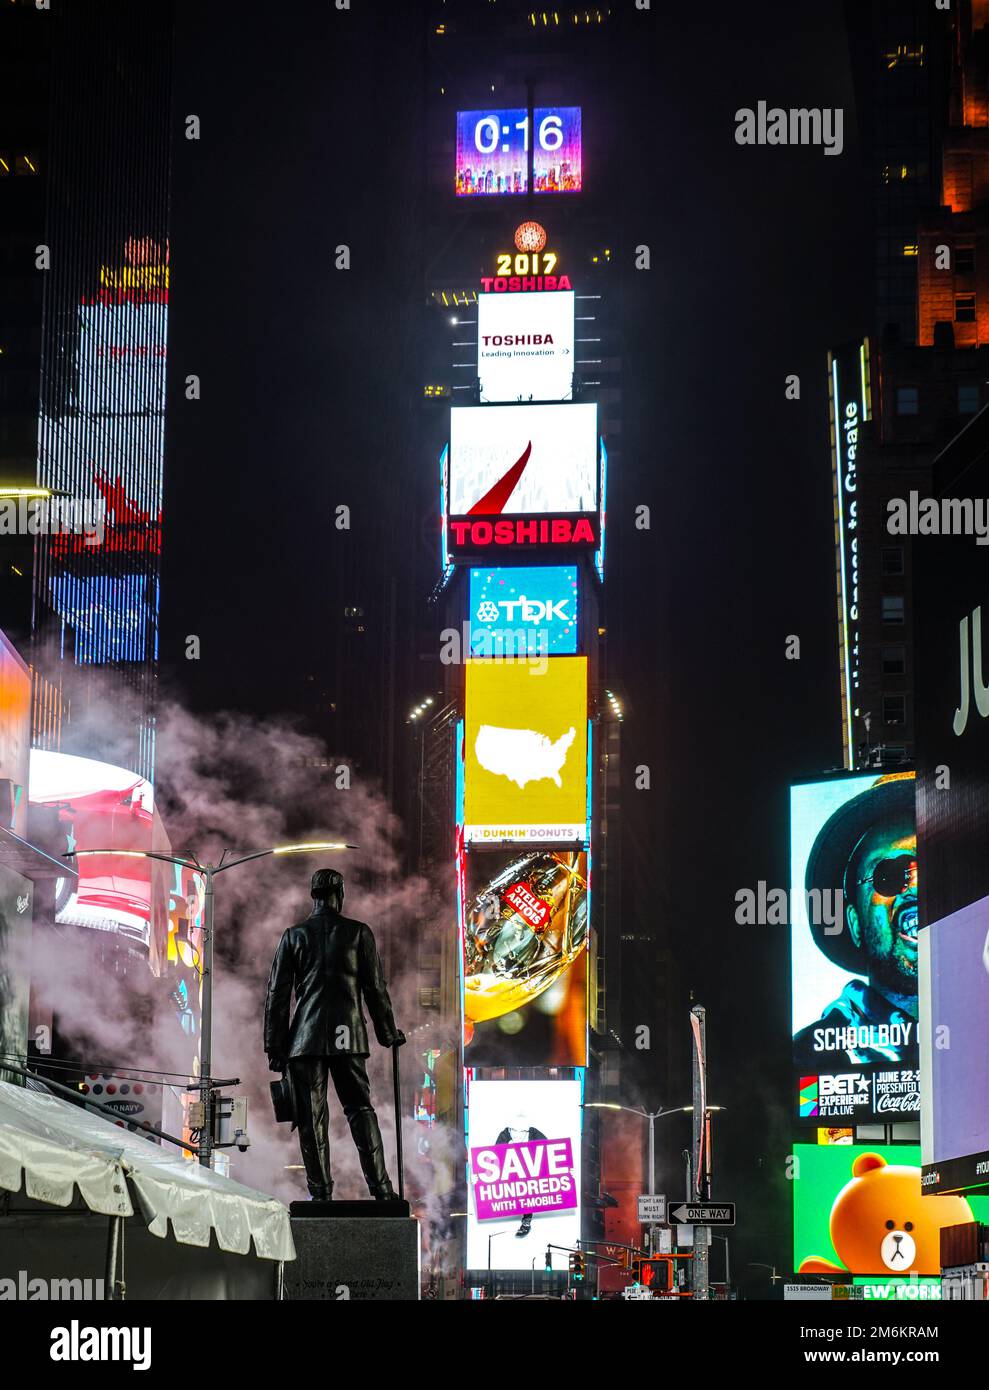 Night view of the New York Times Square (TimesSquare) Stock Photo